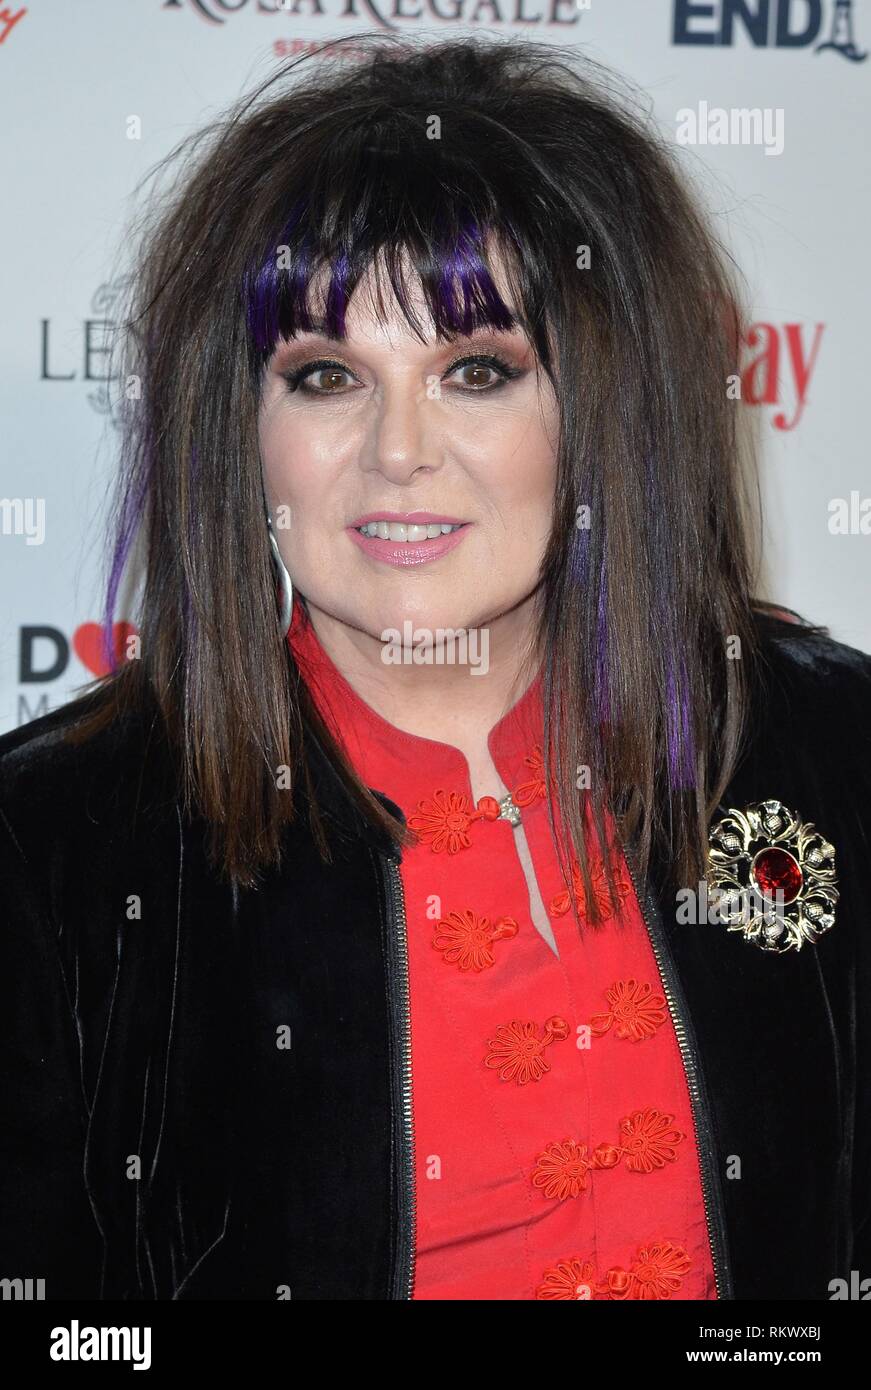 New York, NY, USA. 12th Feb, 2019. Ann Wilson at arrivals for Woman's Day Red Dress Awards, The Appel Room at Jazz at Lincoln Center, New York, NY February 12, 2019. Credit: Kristin Callahan/Everett Collection/Alamy Live News Stock Photo